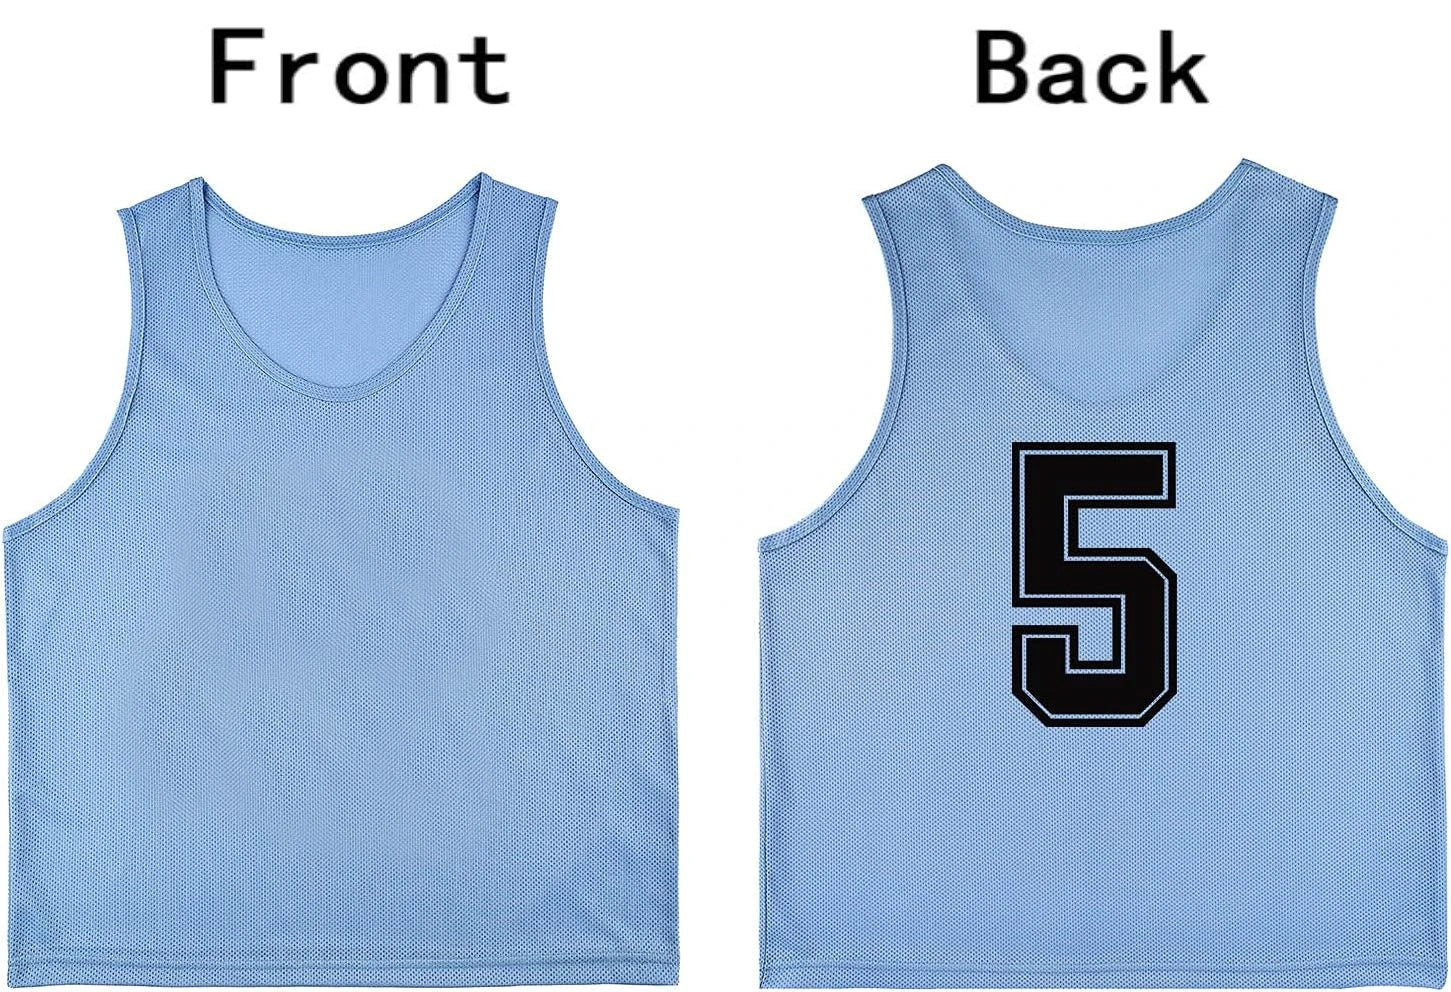 Tych3L 12 Pack of Numbered Jersey Bibs Scrimmage Training Vests for all sizes.